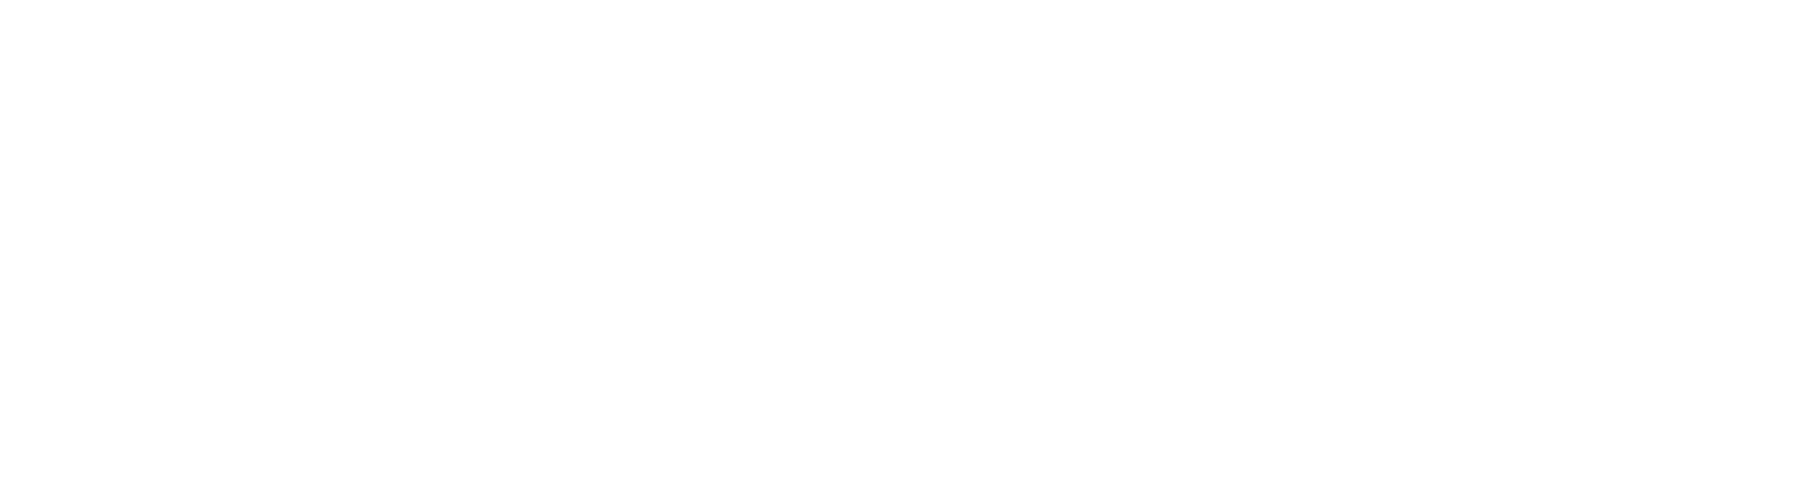 armstrong-appraisal-placeholder-logo